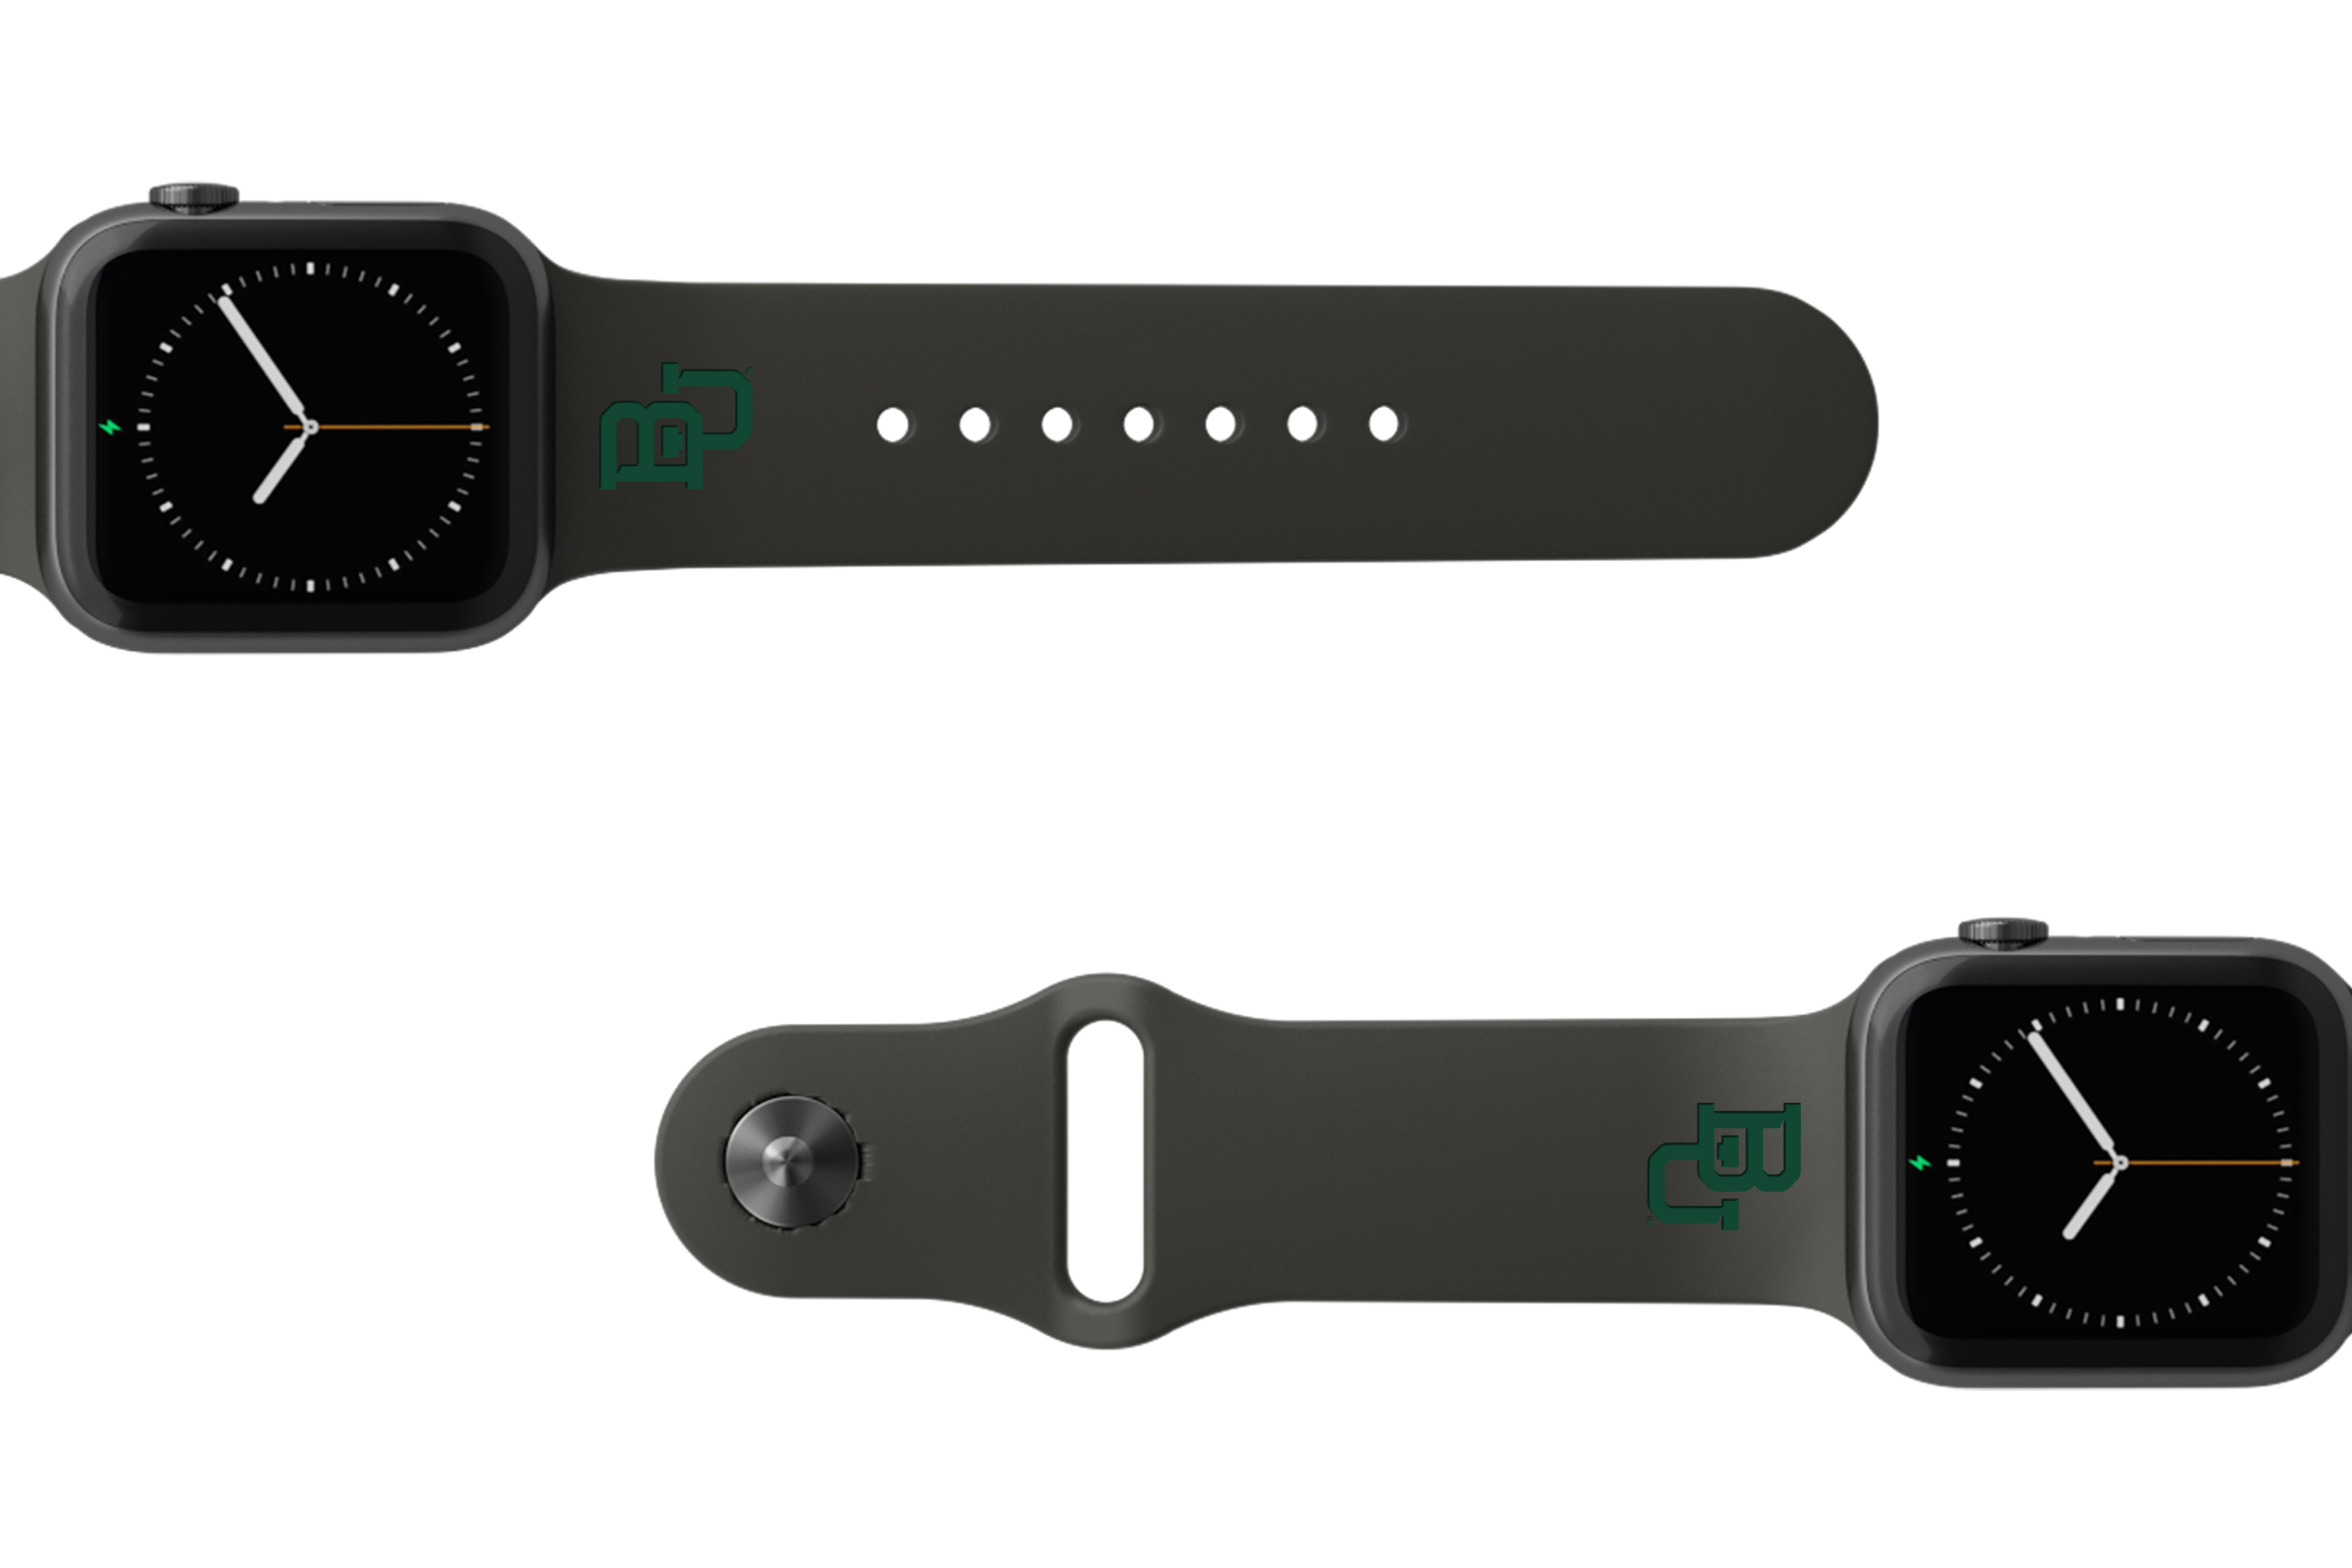 College Baylor Black    apple watch band with gray hardware viewed from rear 